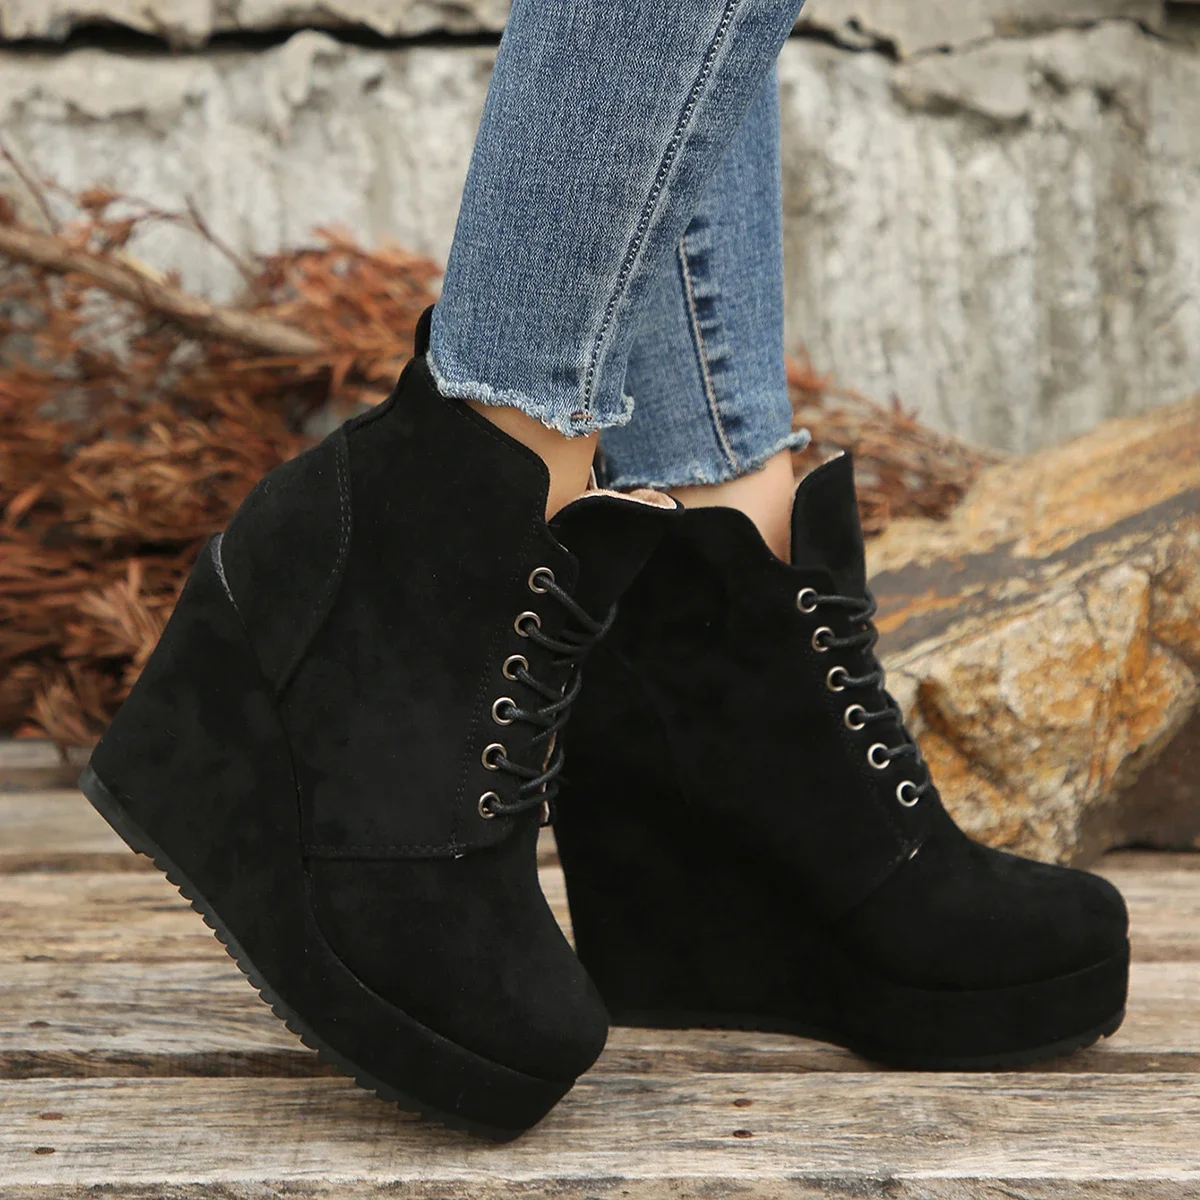 

NEW Platform Women's Ankle Boots Autumn Winter Shoes Wedge High Heels Lace Up Short Boot Nude Suede Wedges Dance Party Shoes